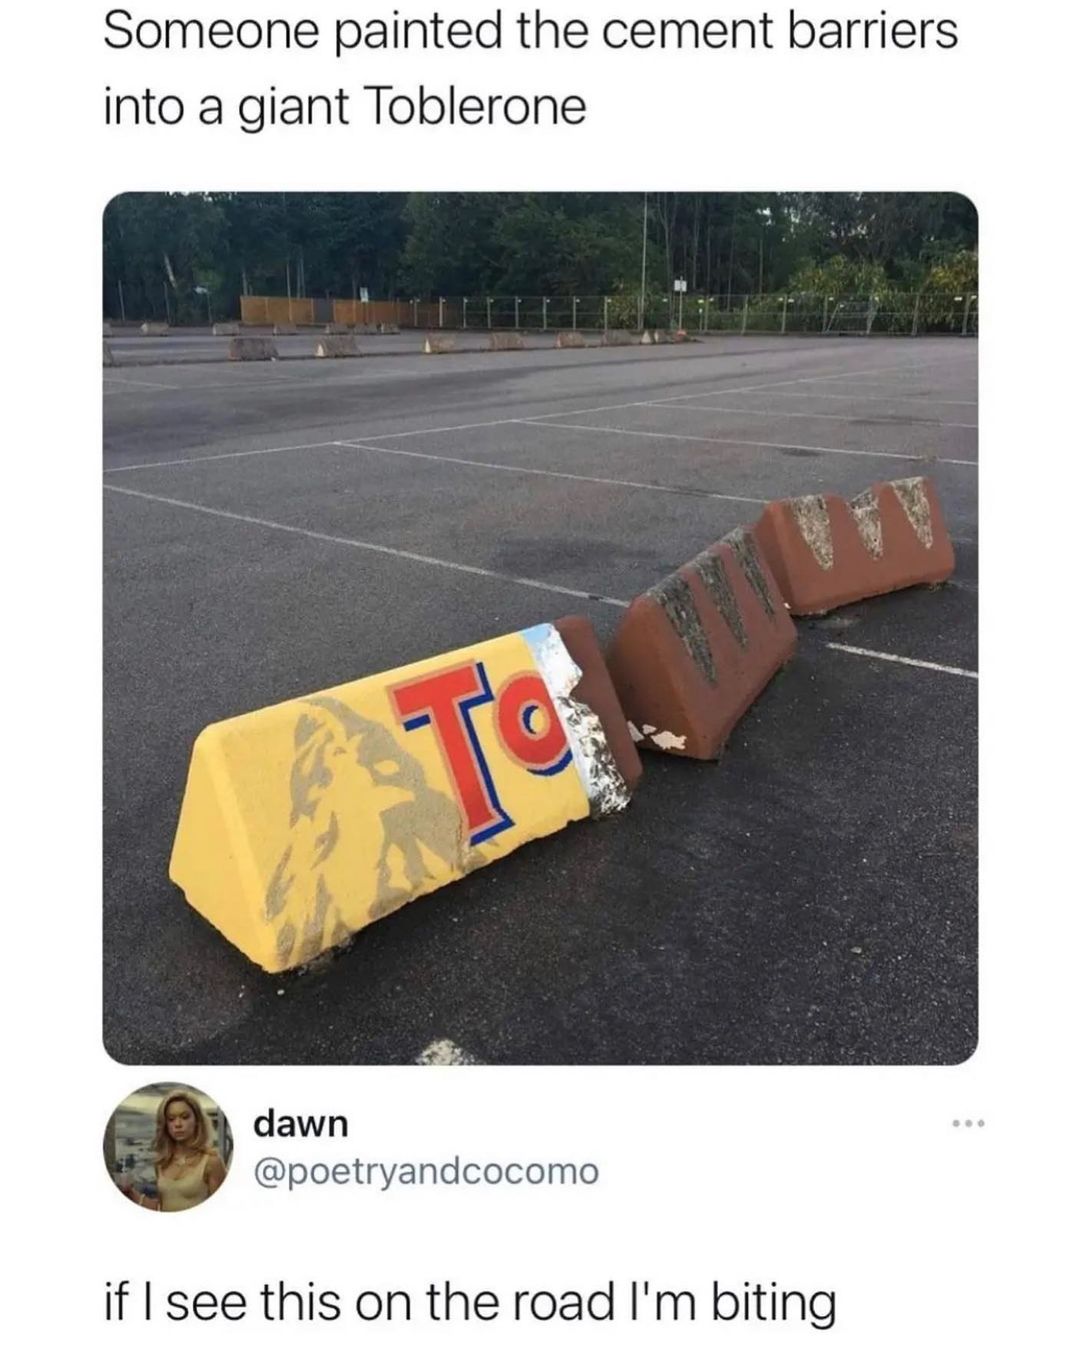 thought you was stuck in the seatbelt - Someone painted the cement barriers into a giant Toblerone Tg dawn if I see this on the road I'm biting